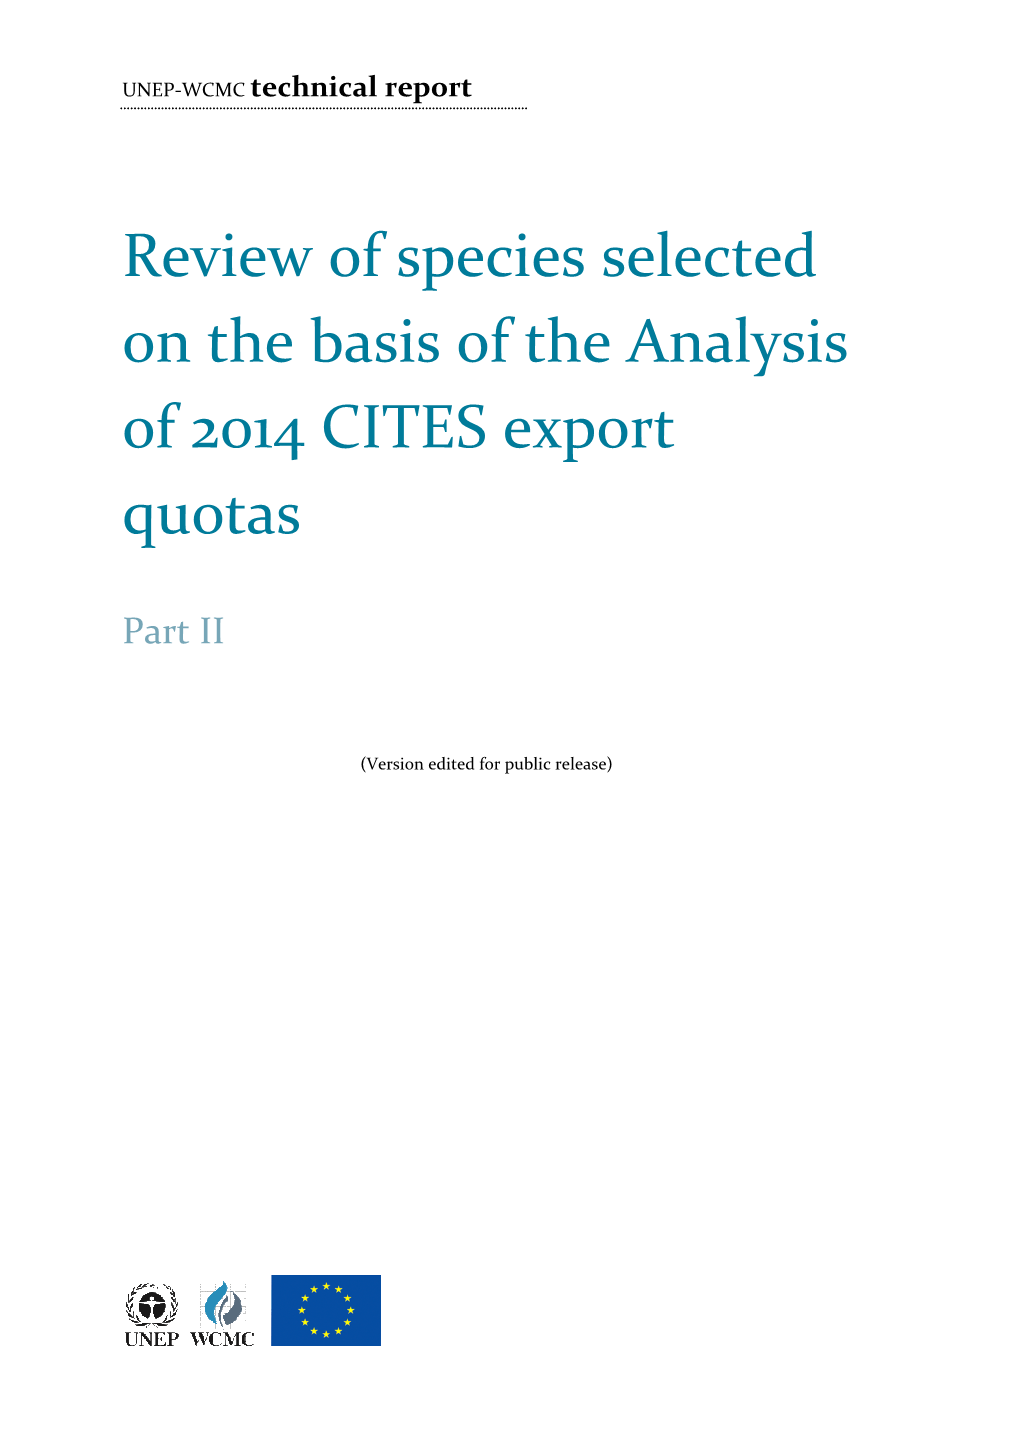 Review of on the Basis of of 2014 CITES Quotas of Species Selected